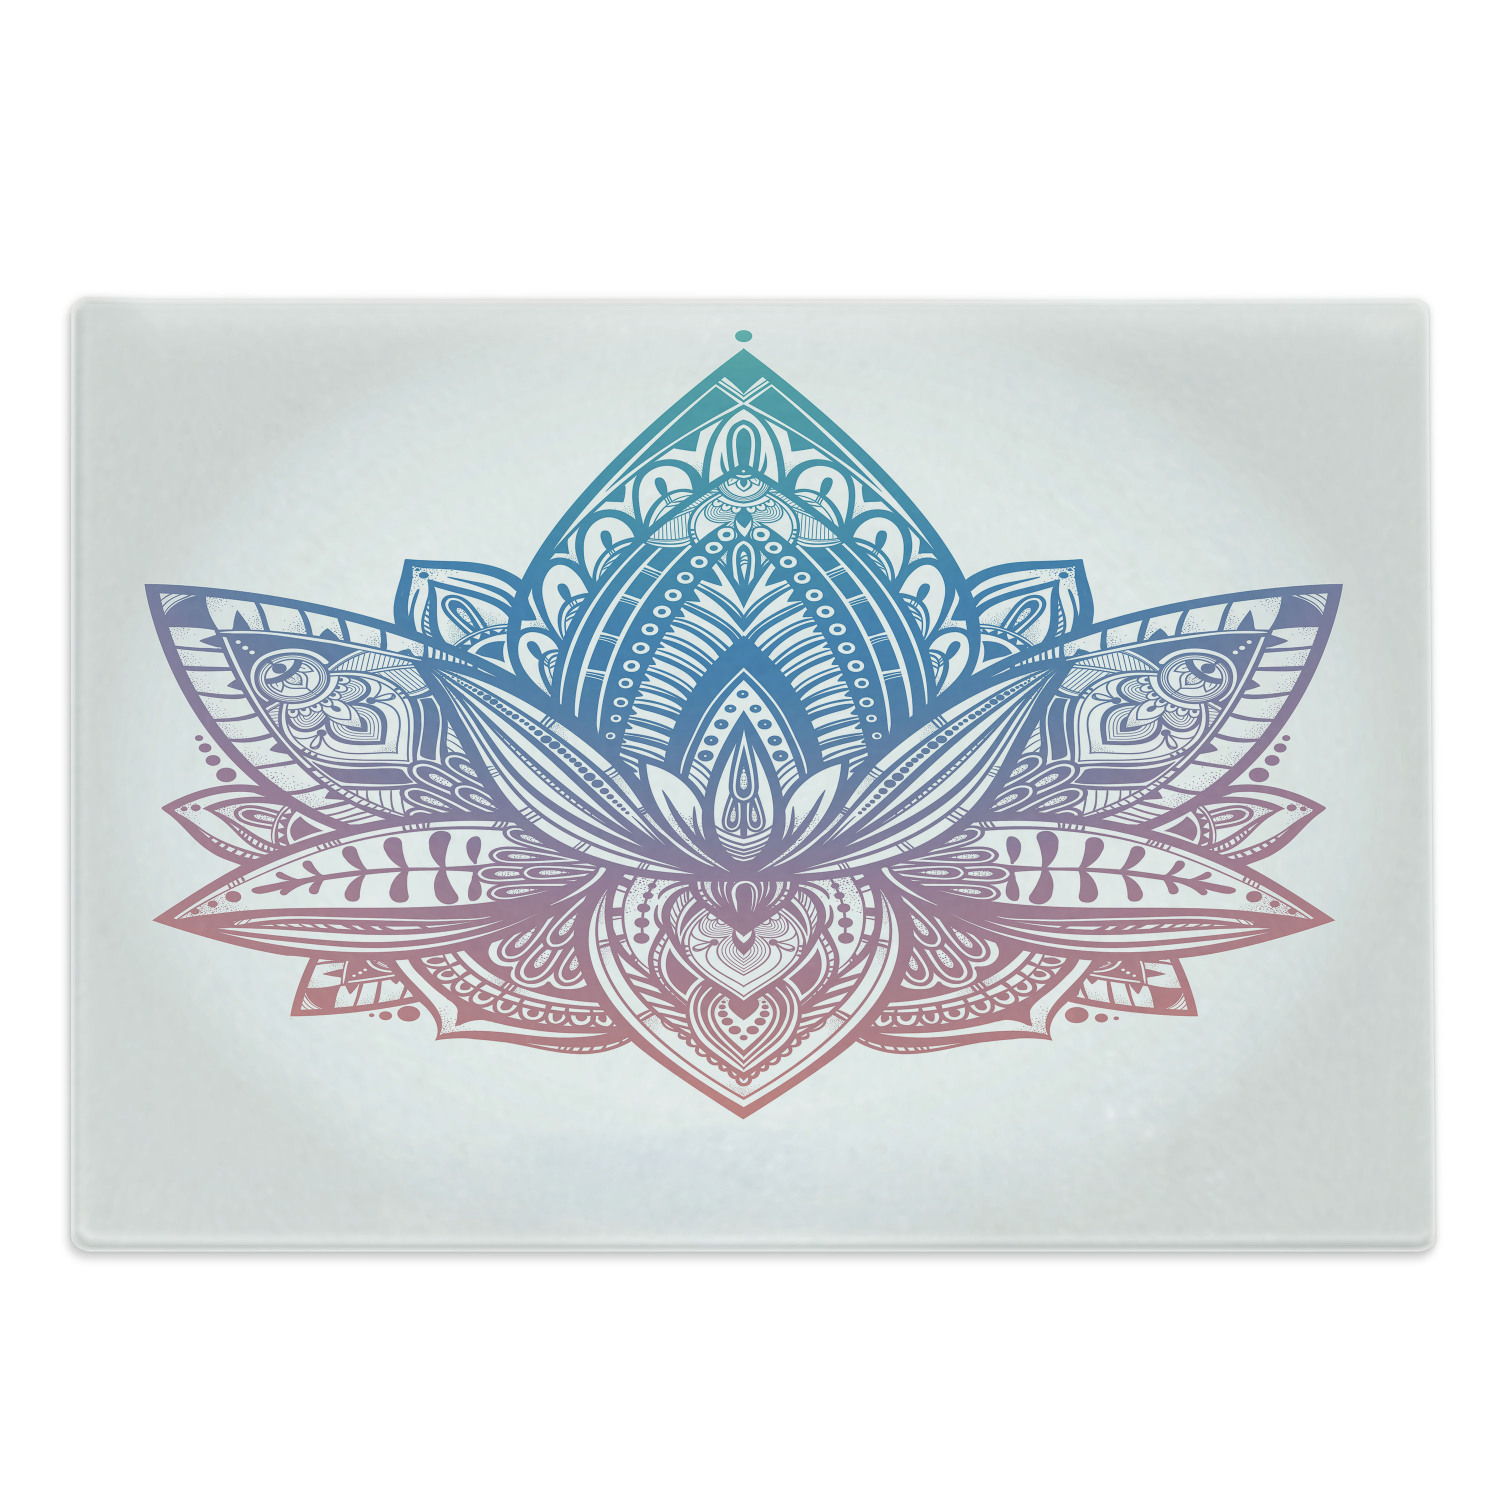 Yoga Cutting Board, Tribal Patterned Boho Ornamental Lotus Flower Art, Decorative Tempered Glass Cutting and Serving Board, Large Size, Dried Rose White, by Ambesonne - image 1 of 1